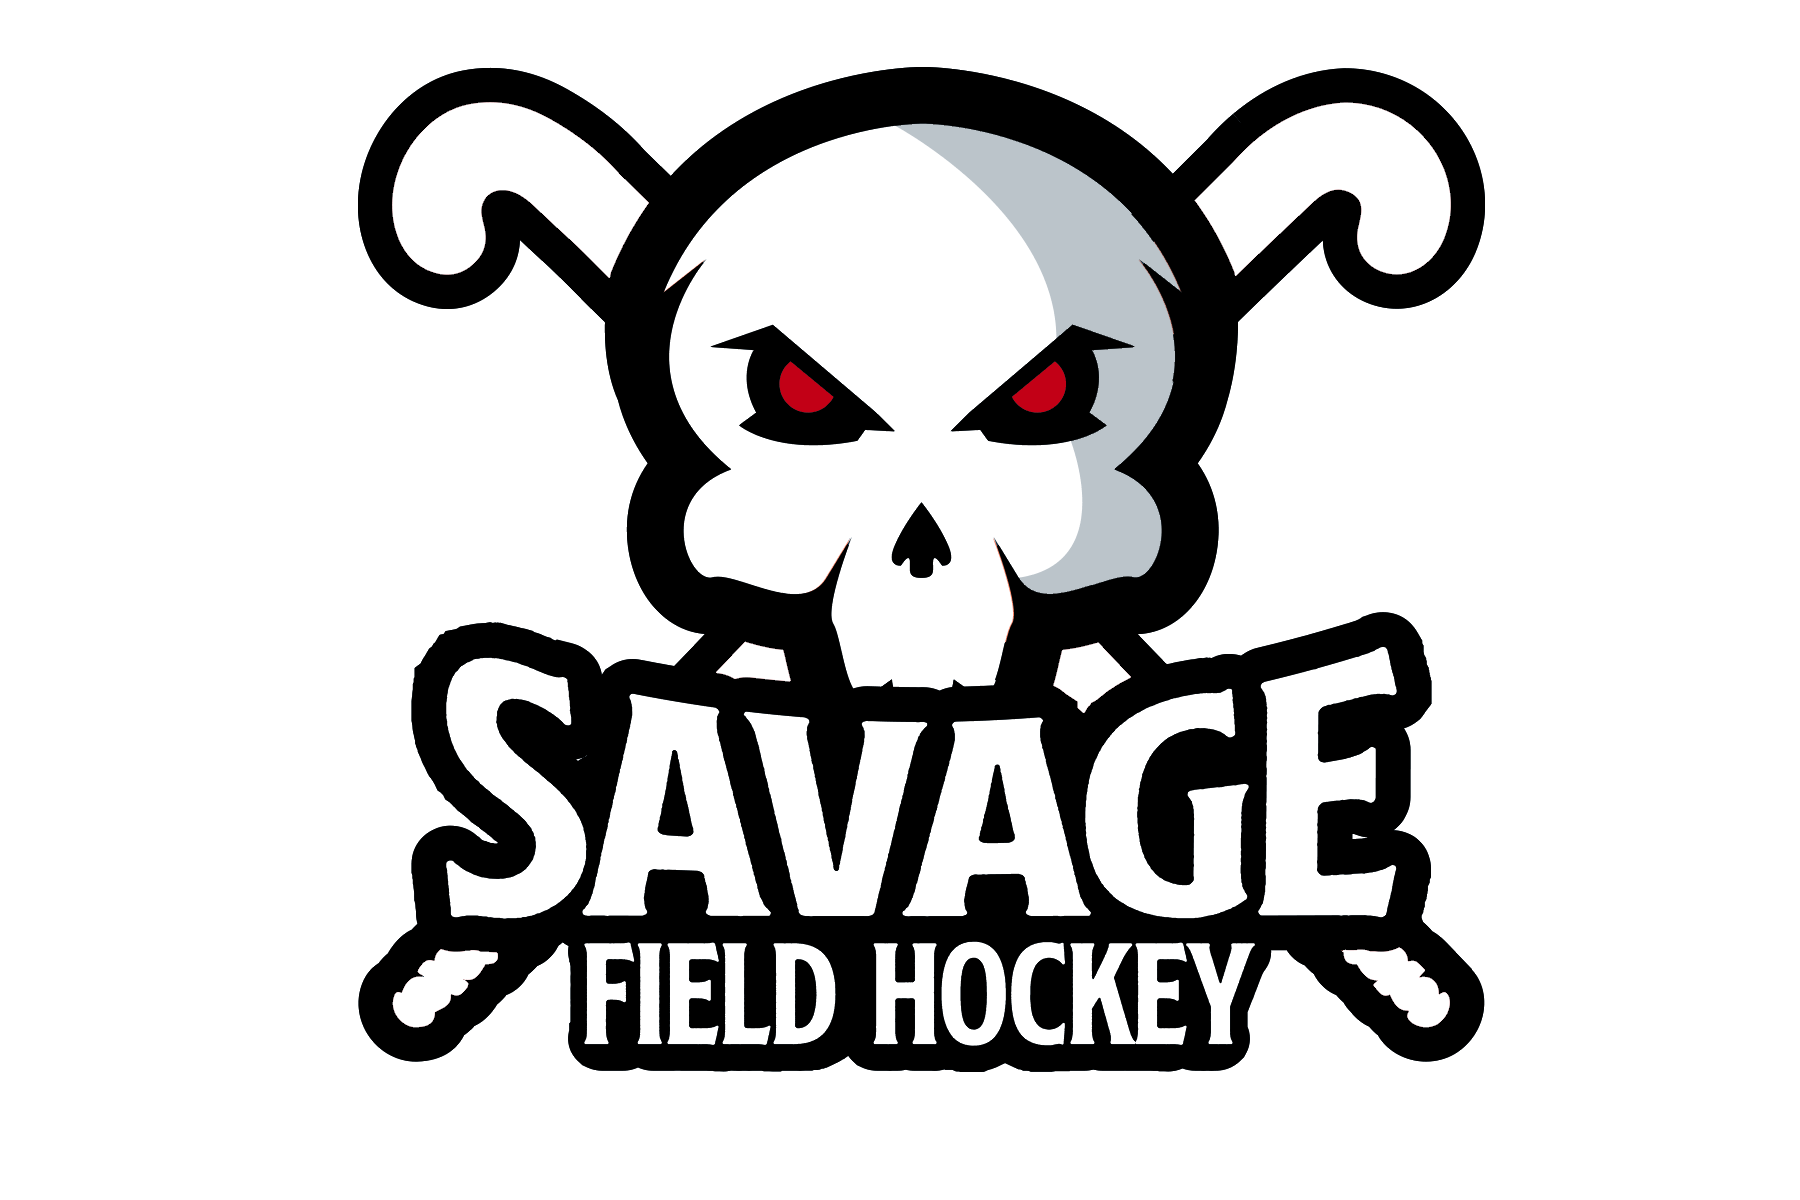 Red Hockey Logo - Savage field hockey logo outline with shadow and red eyes | Savage ...